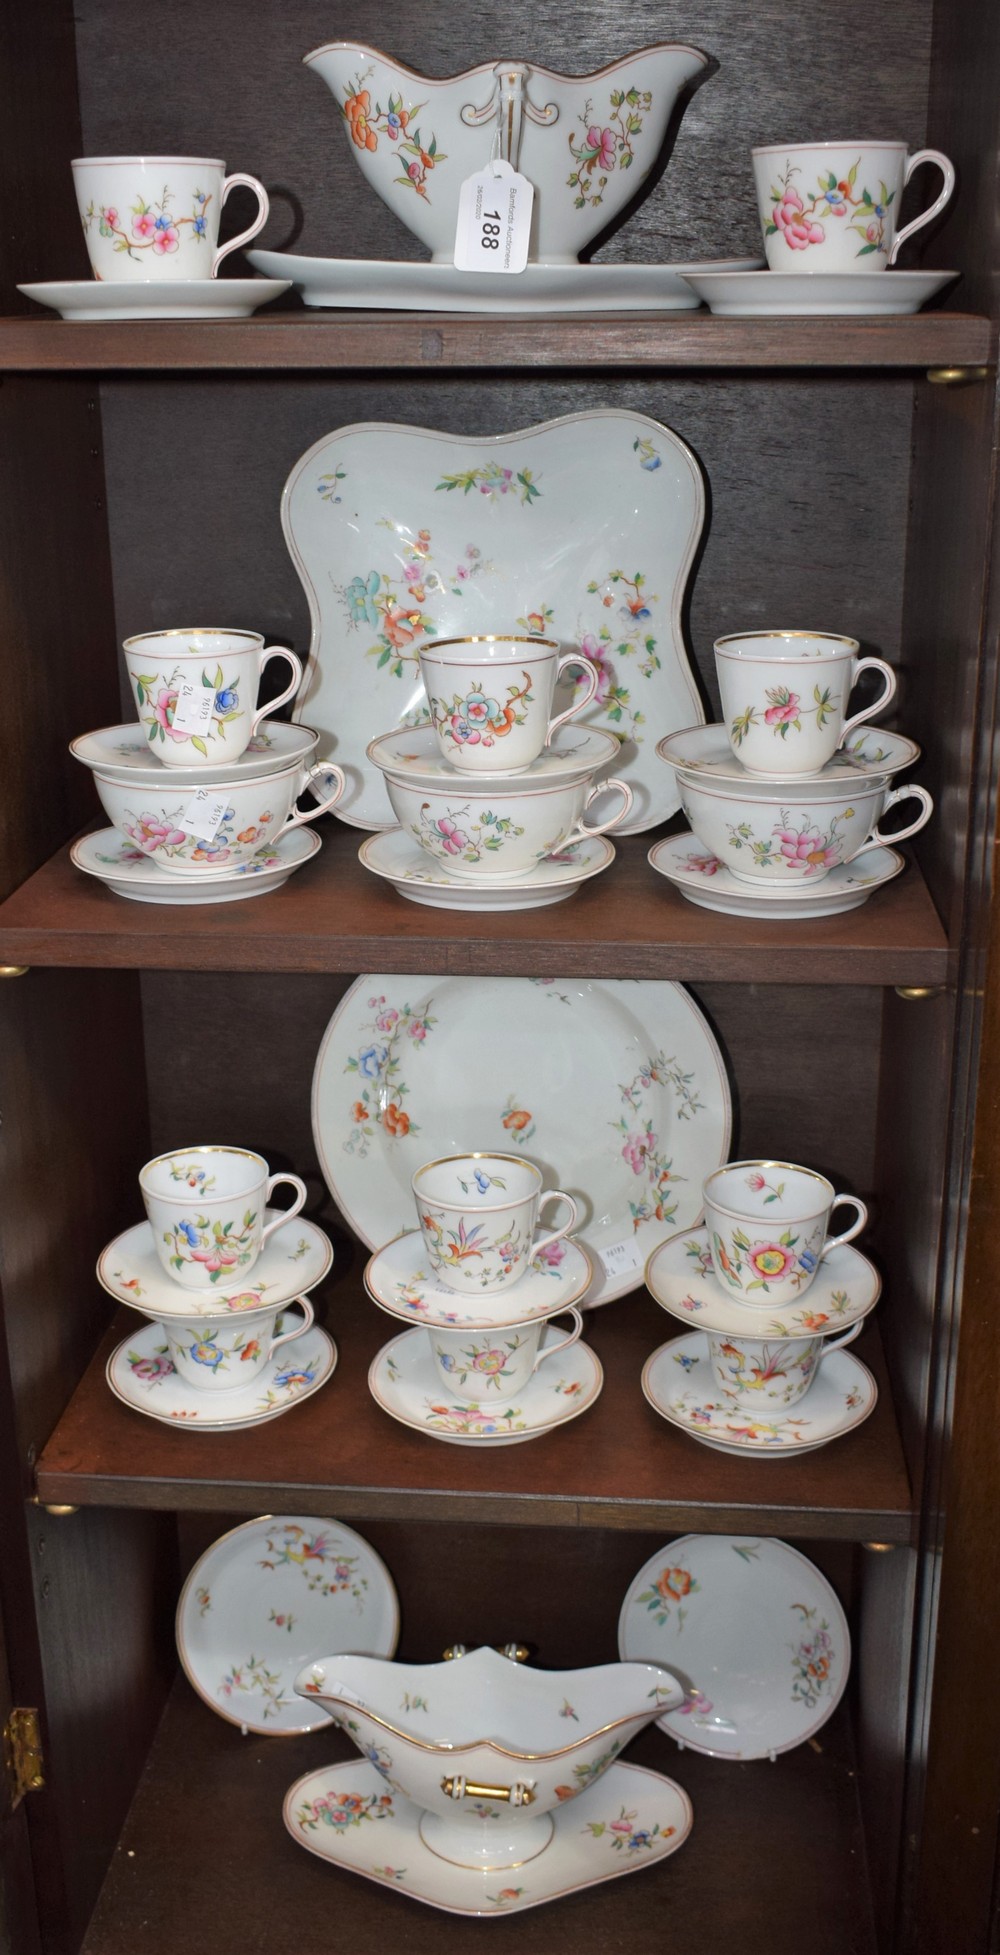 A late 19th century porcelain part service, floral sprigs on white ground, including sauce boats,